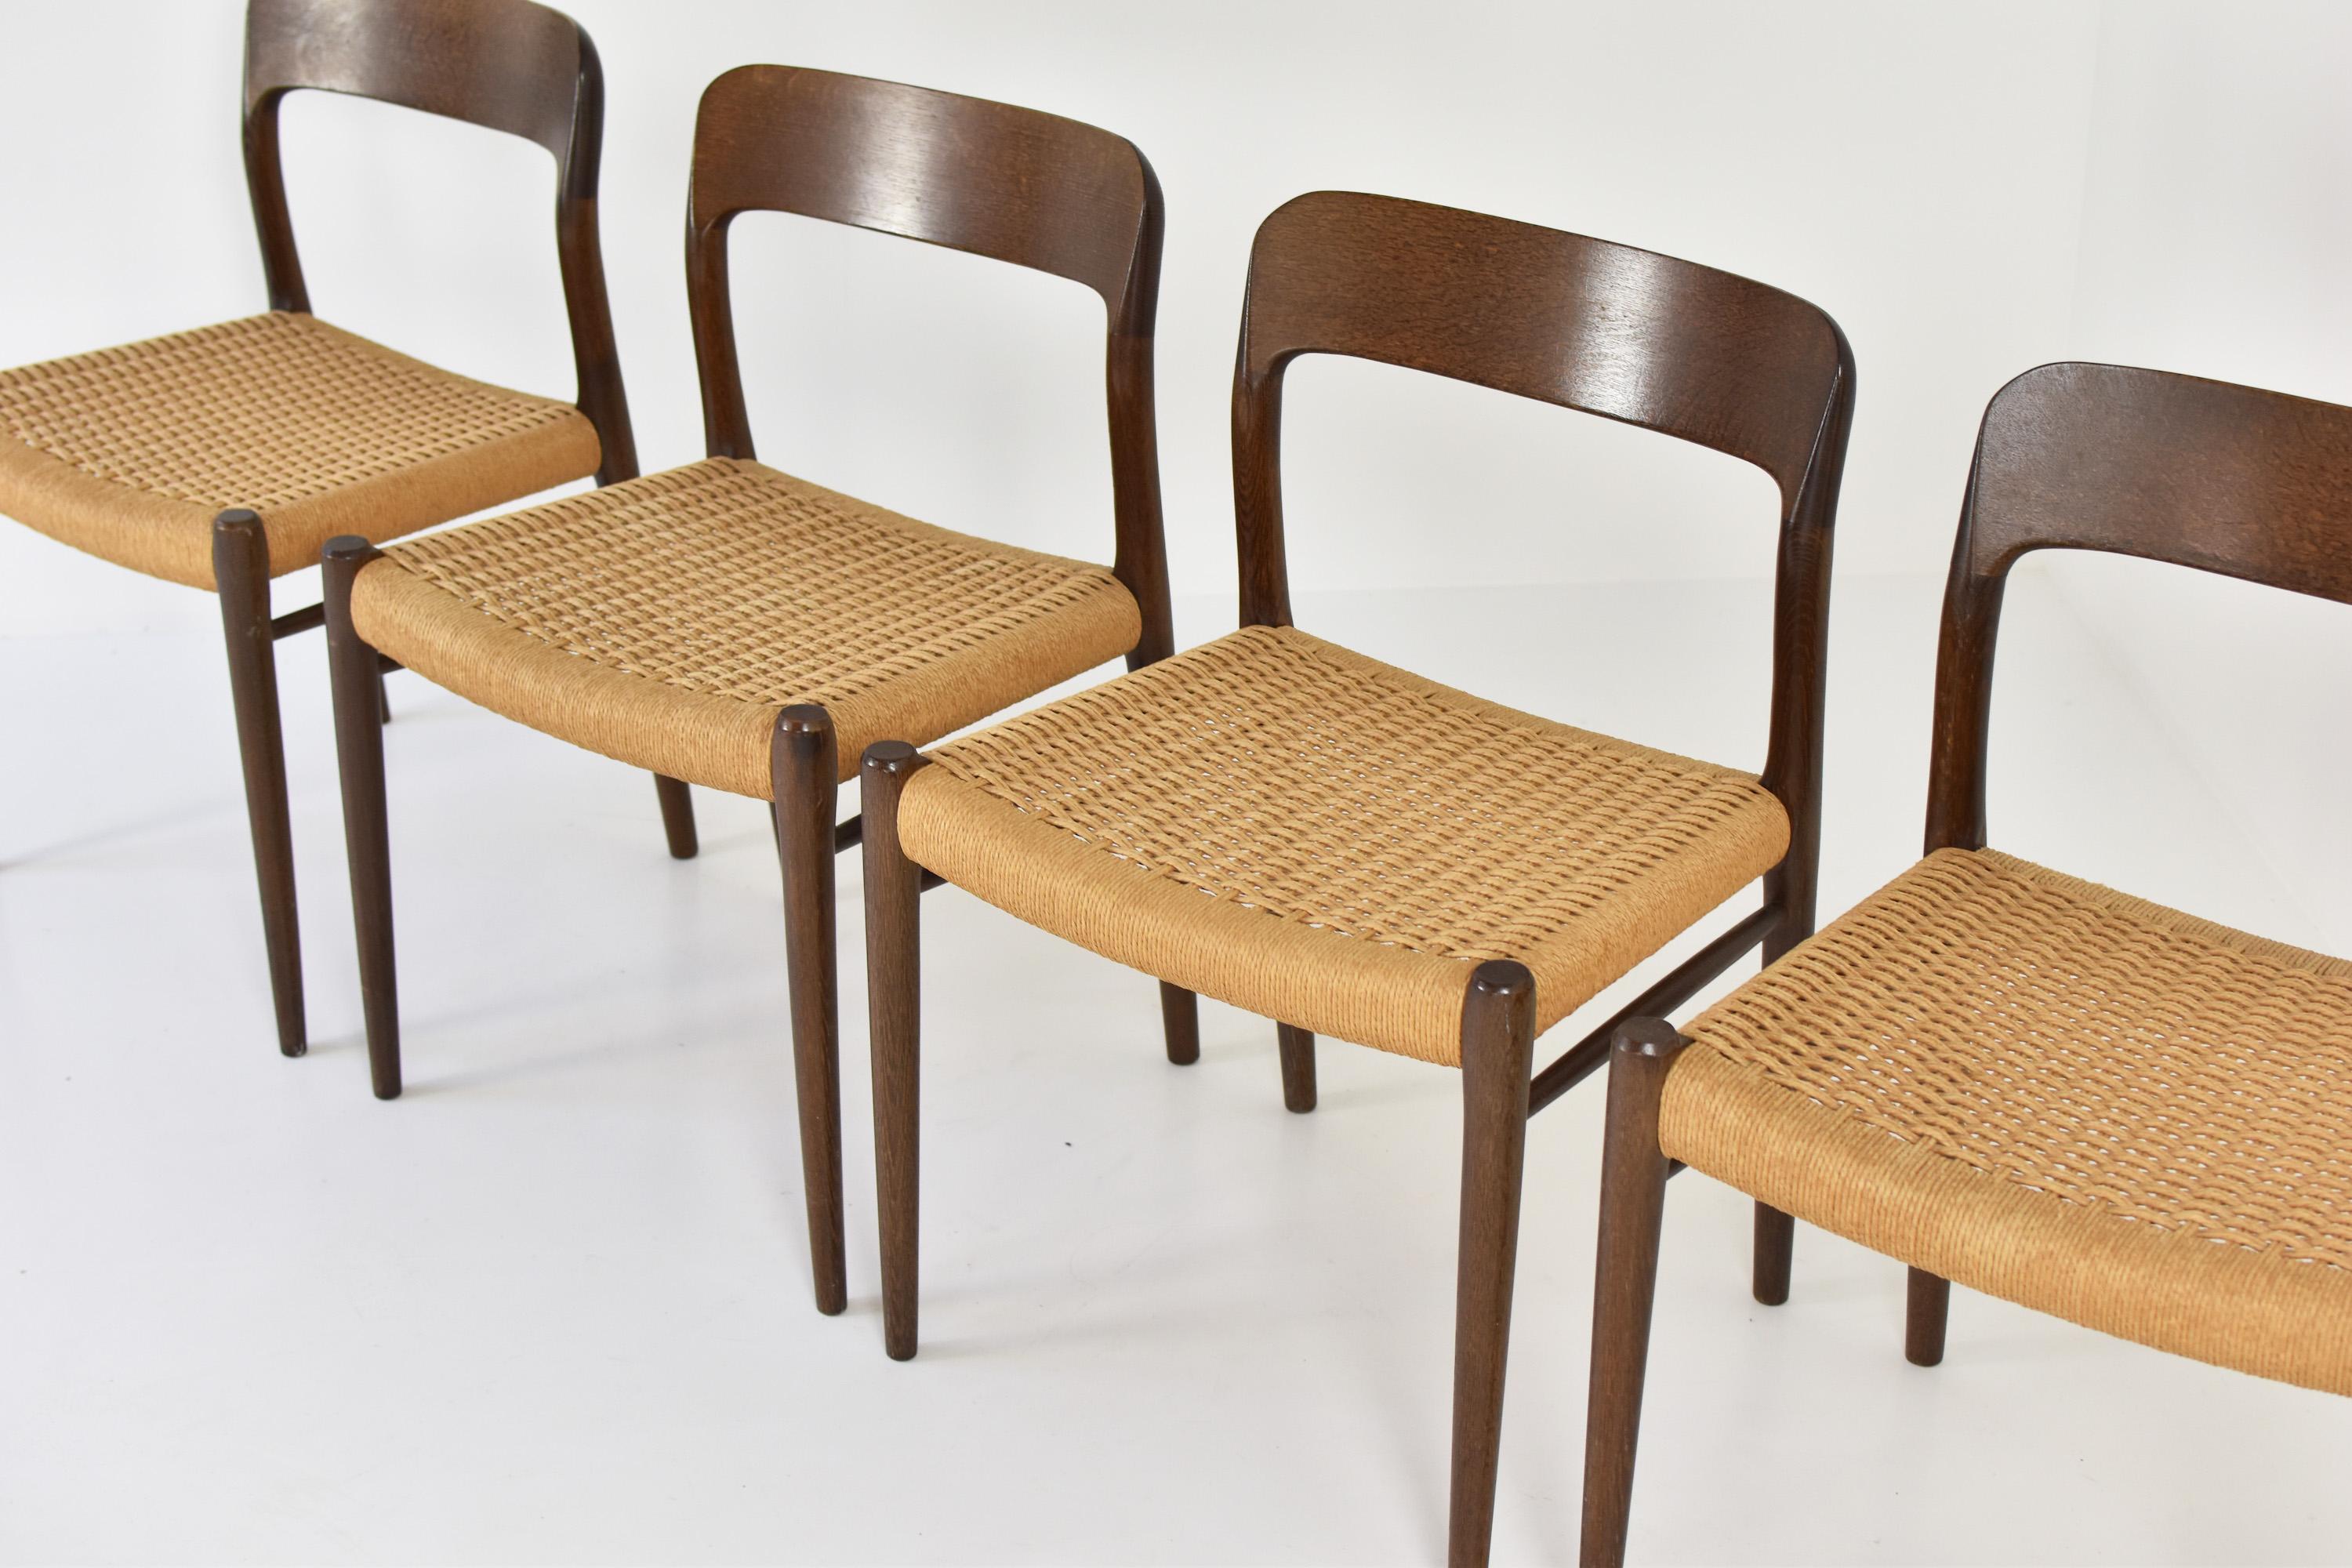 Lovely set of four ‘model 75’ chairs by Niels Otto Møller for J.L.Møllers Mobelfabrik, Denmark, 1960s. This set is made out of solid Wenge with its original papercord seats. These chairs are in very good condition with minor wear consistent with age